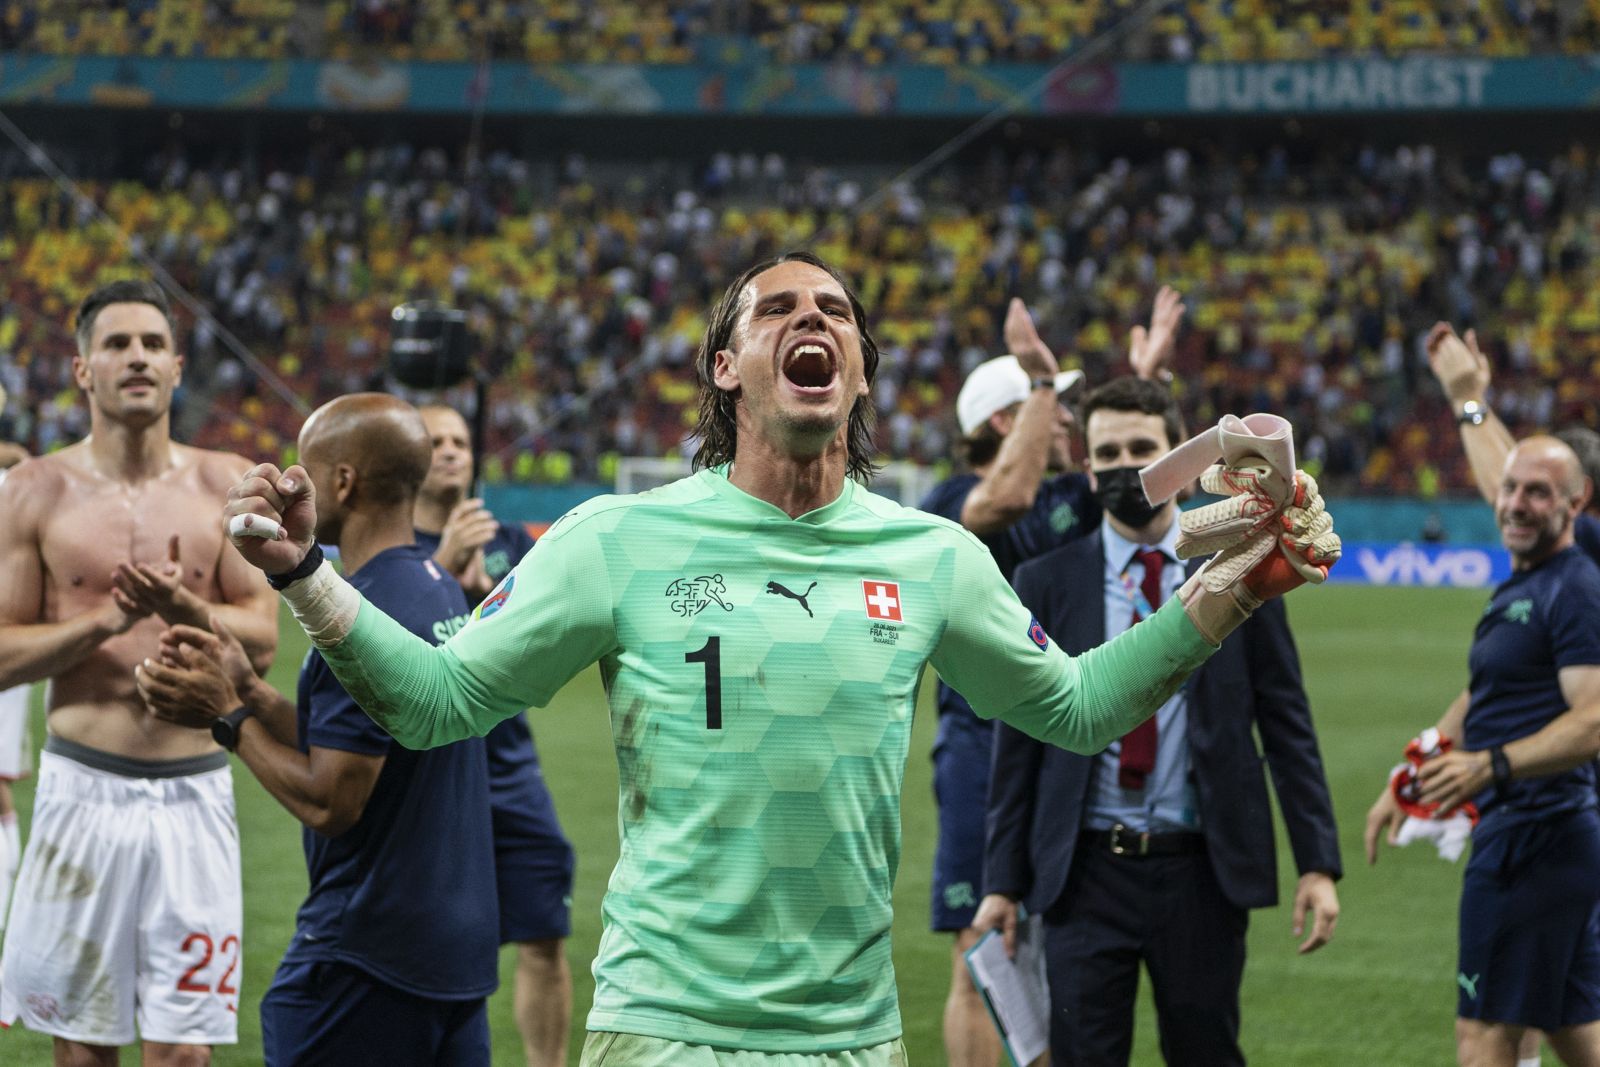 Switzerland's goalkeeper Yann Sommer celebrates after a penalty shootout at the end of the Euro 2020 soccer championship round of 16 match between France and Switzerland at the National Arena stadium, in Bucharest, Romania, Monday, June 28, 2021. Switzerland won on penalties after the match ended 3-3. (Jean-Christophe Bott/Keystone via AP)